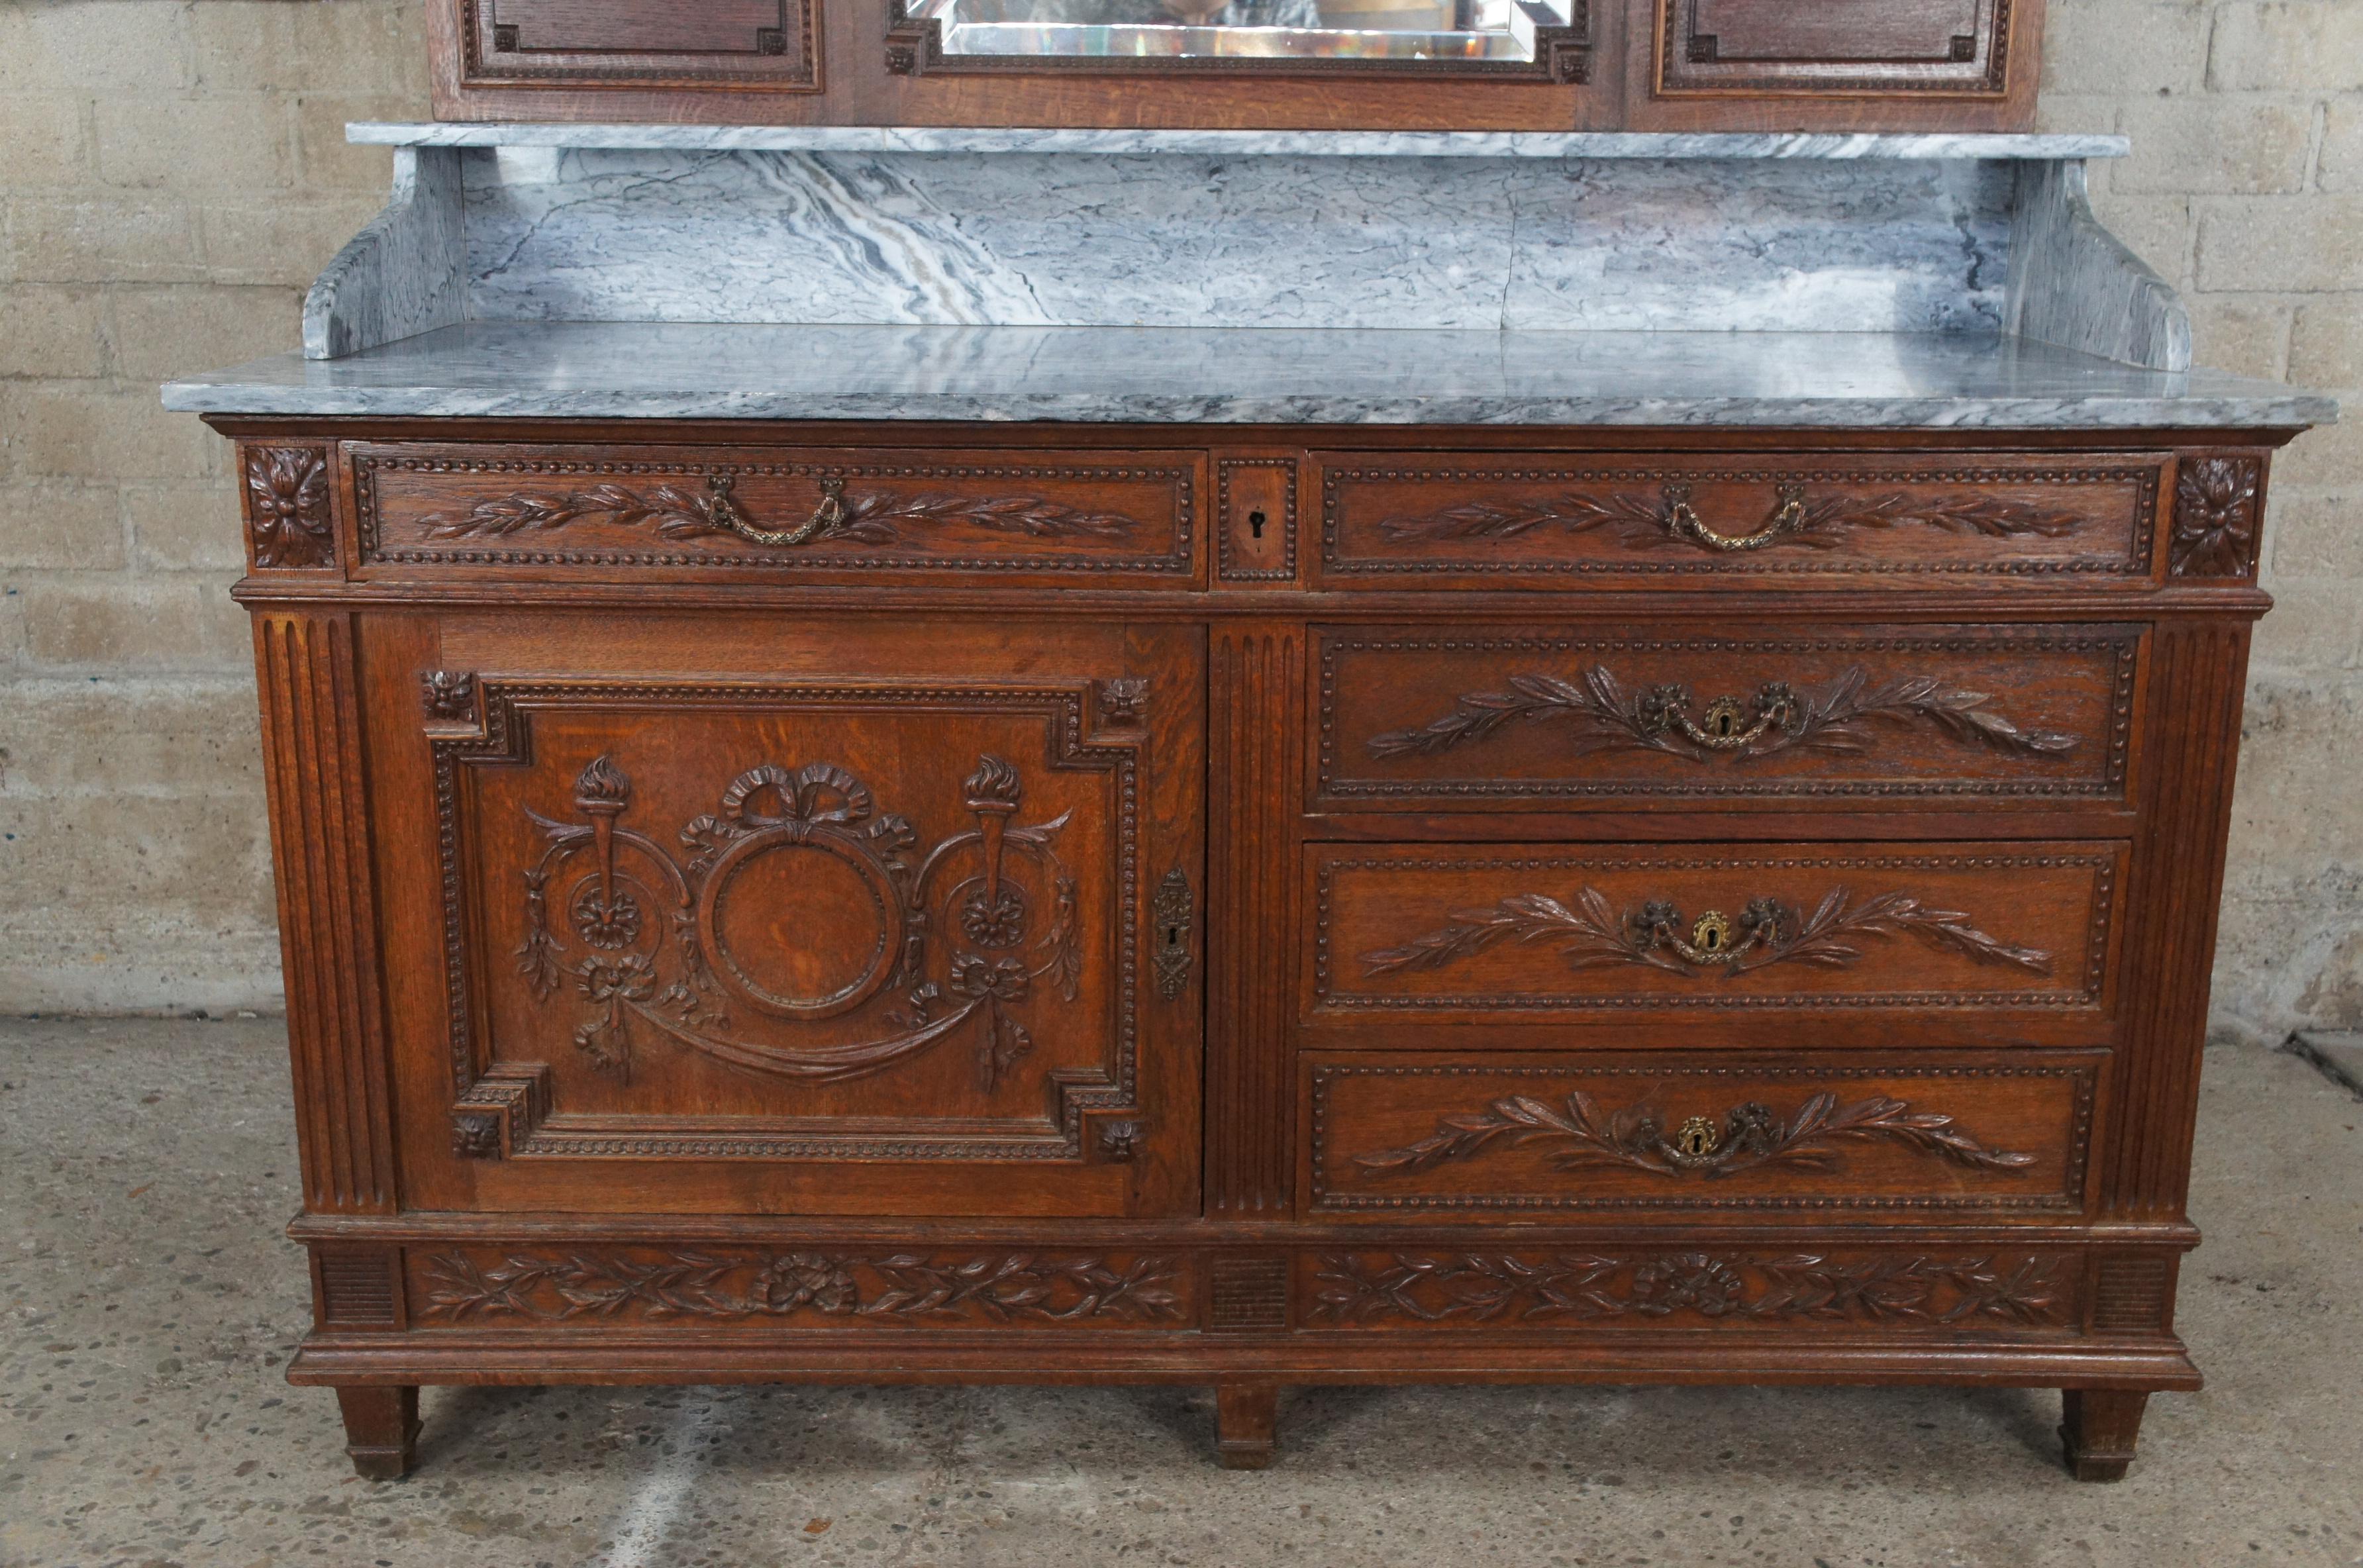 19th Century Antique French Neoclassical Oak Marble Mirrored Dresser Sideboard Buffet Server For Sale